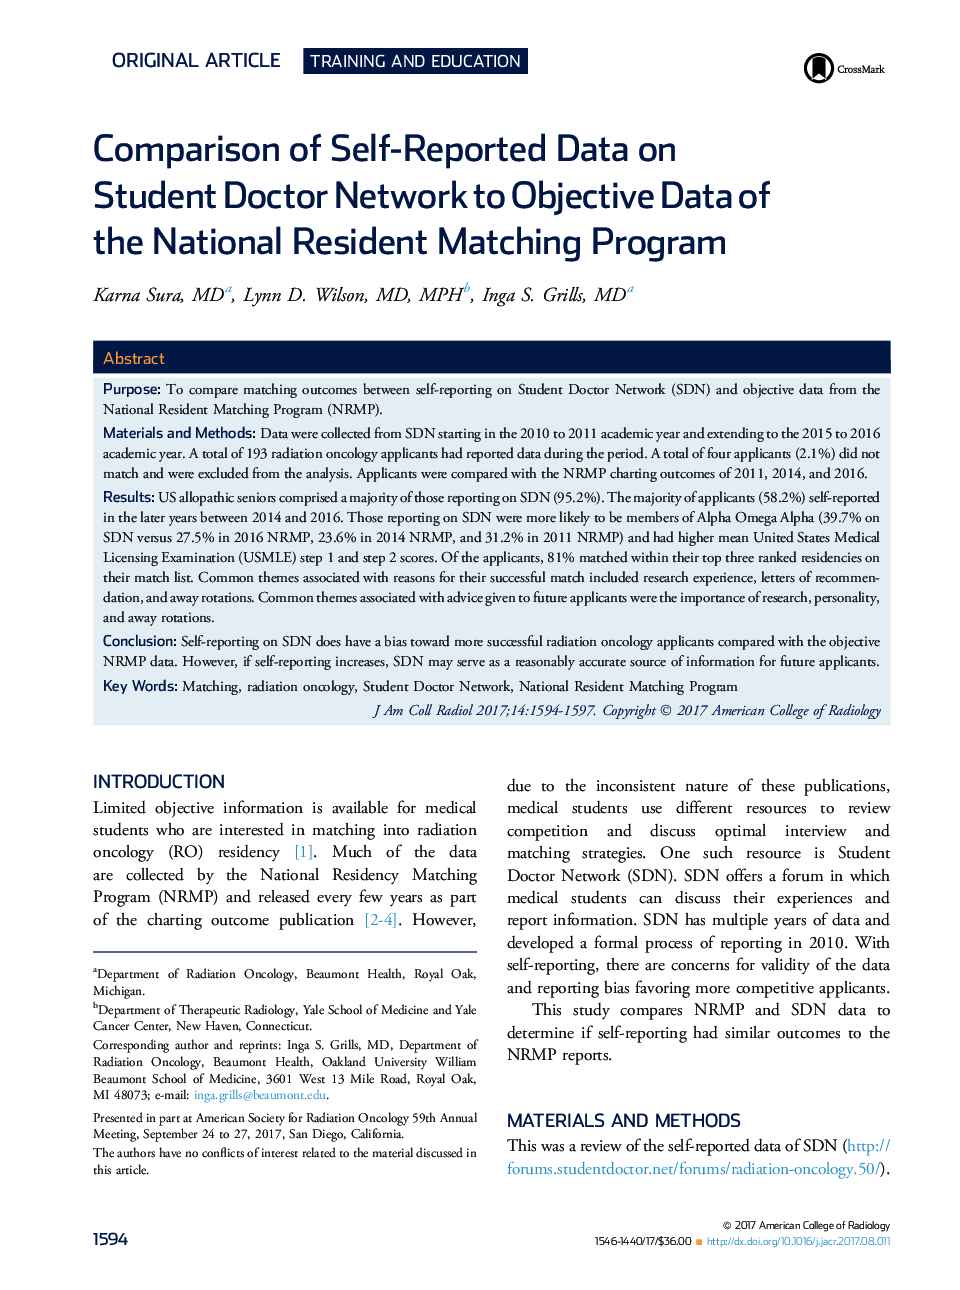 Comparison of Self-Reported Data on Student Doctor Network to Objective DataÂ of the National Resident Matching Program